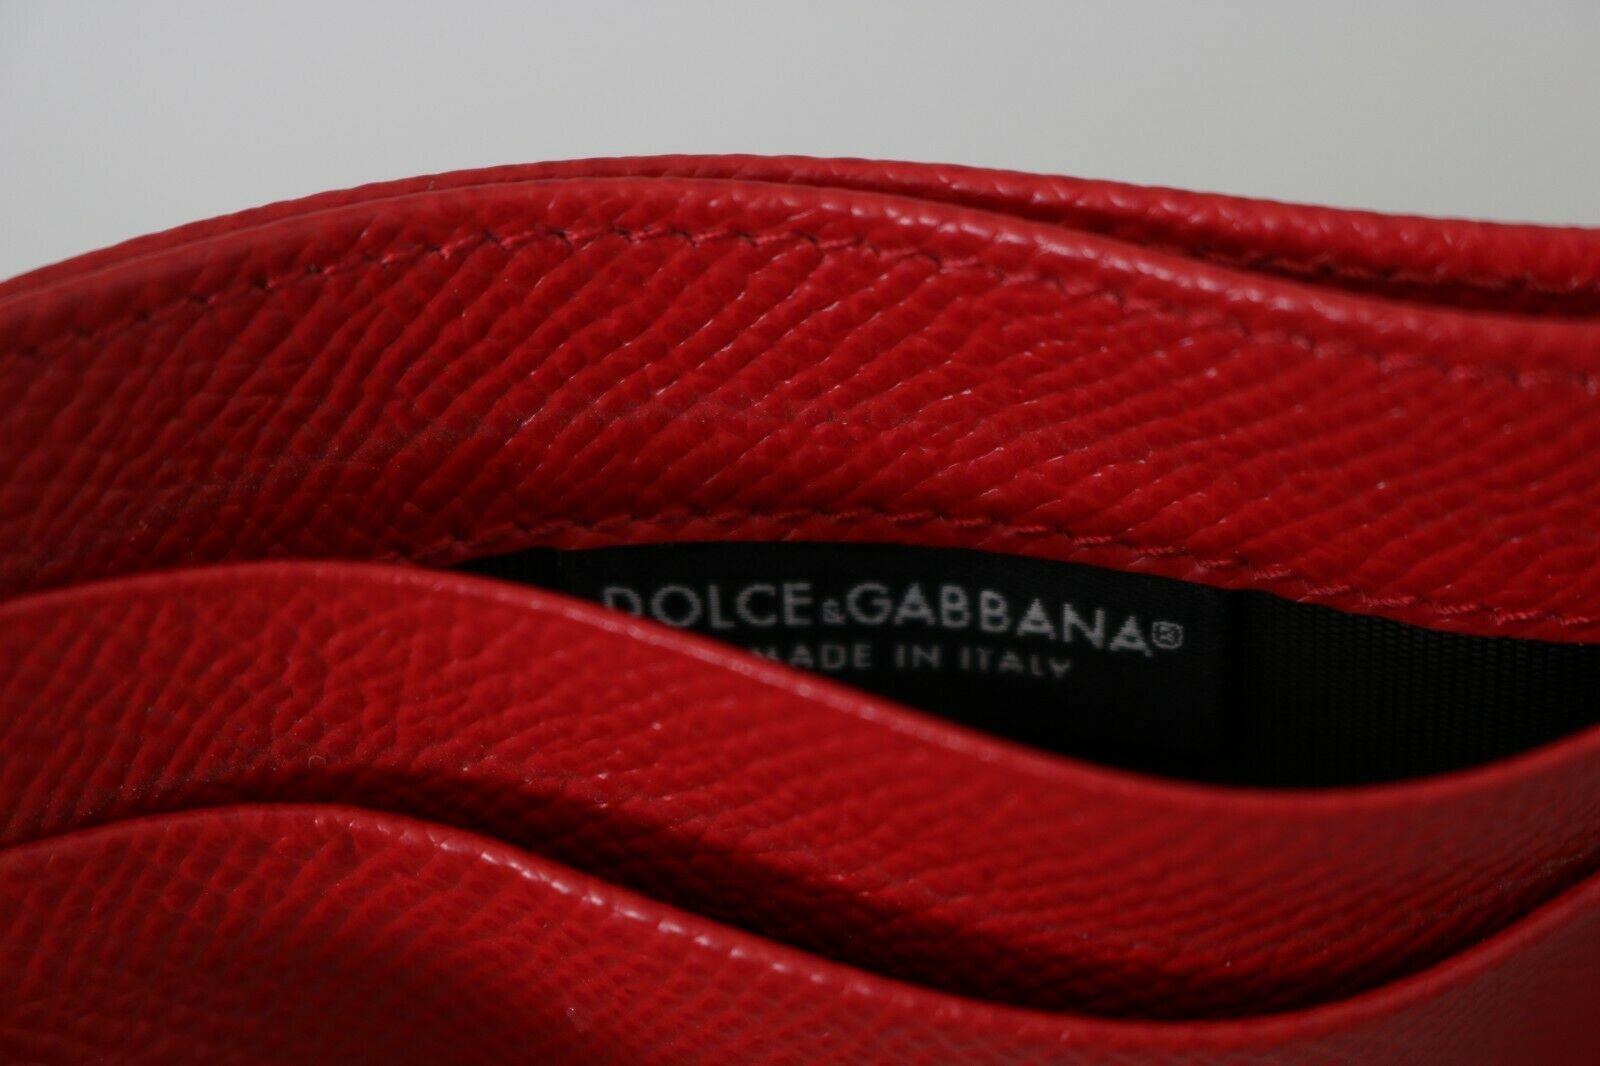 Dolce & Gabbana Red Leather Cardholder Wallet Purse With Clear Crystals DG Logo 1